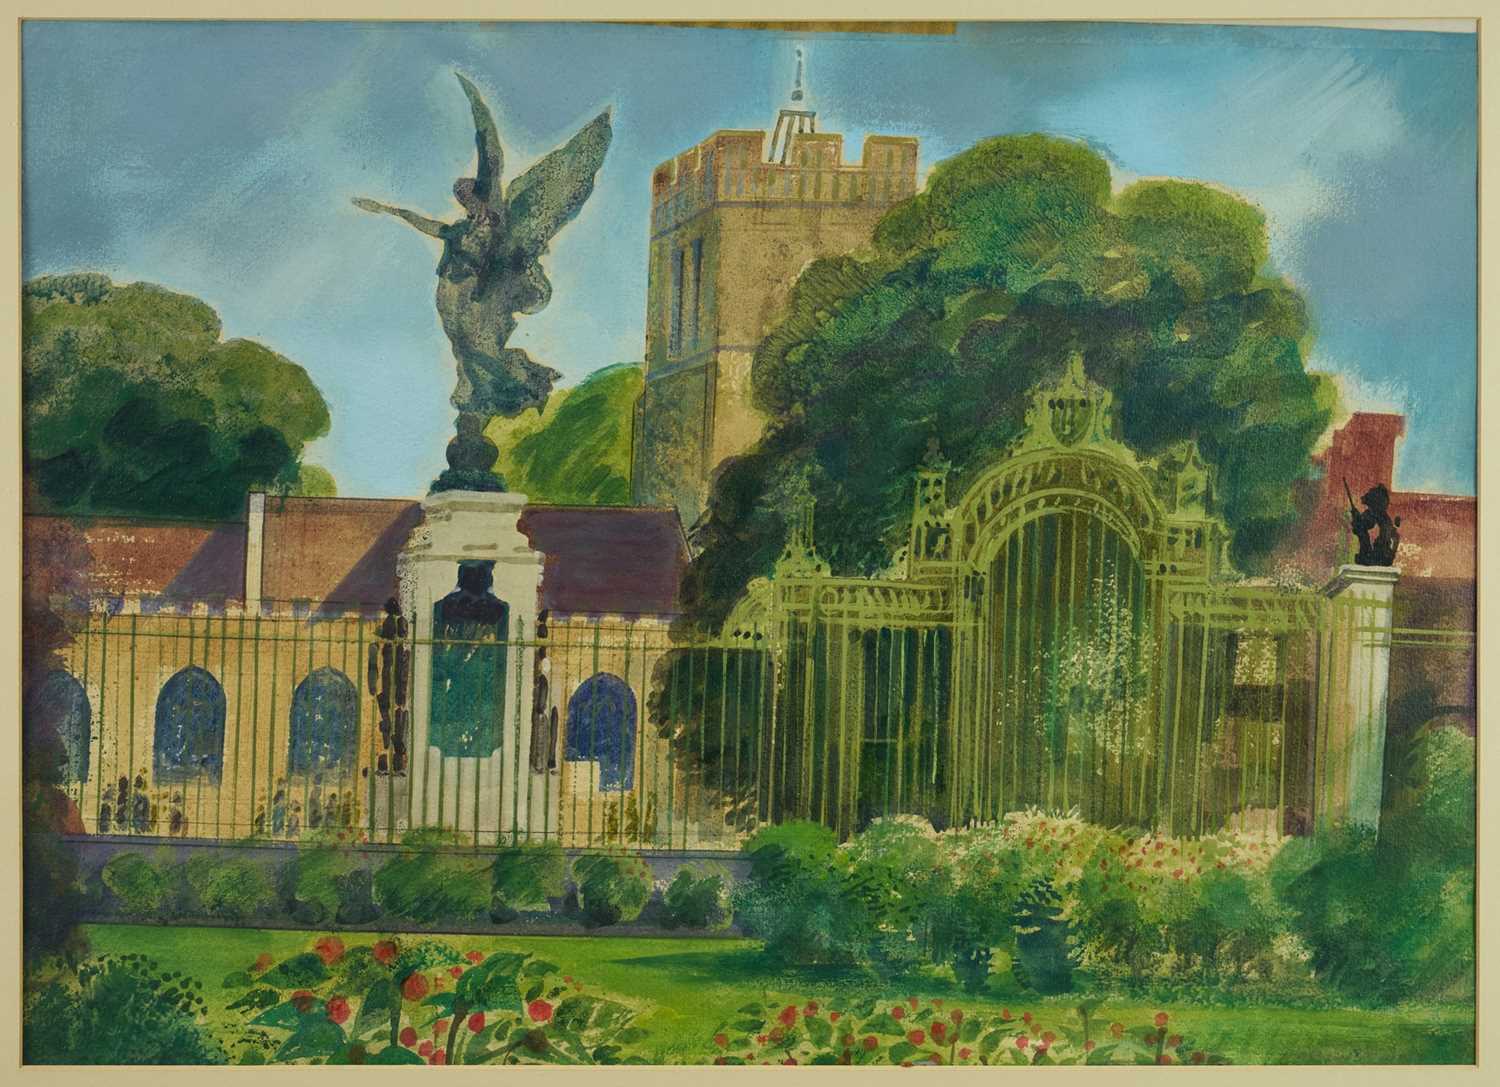 Lot 1137 - Henry Collins (1910-1994) watercolour - Looking away from Colchester Castle, signed and dated 1982, 50cm x 69cm, in glazed frame